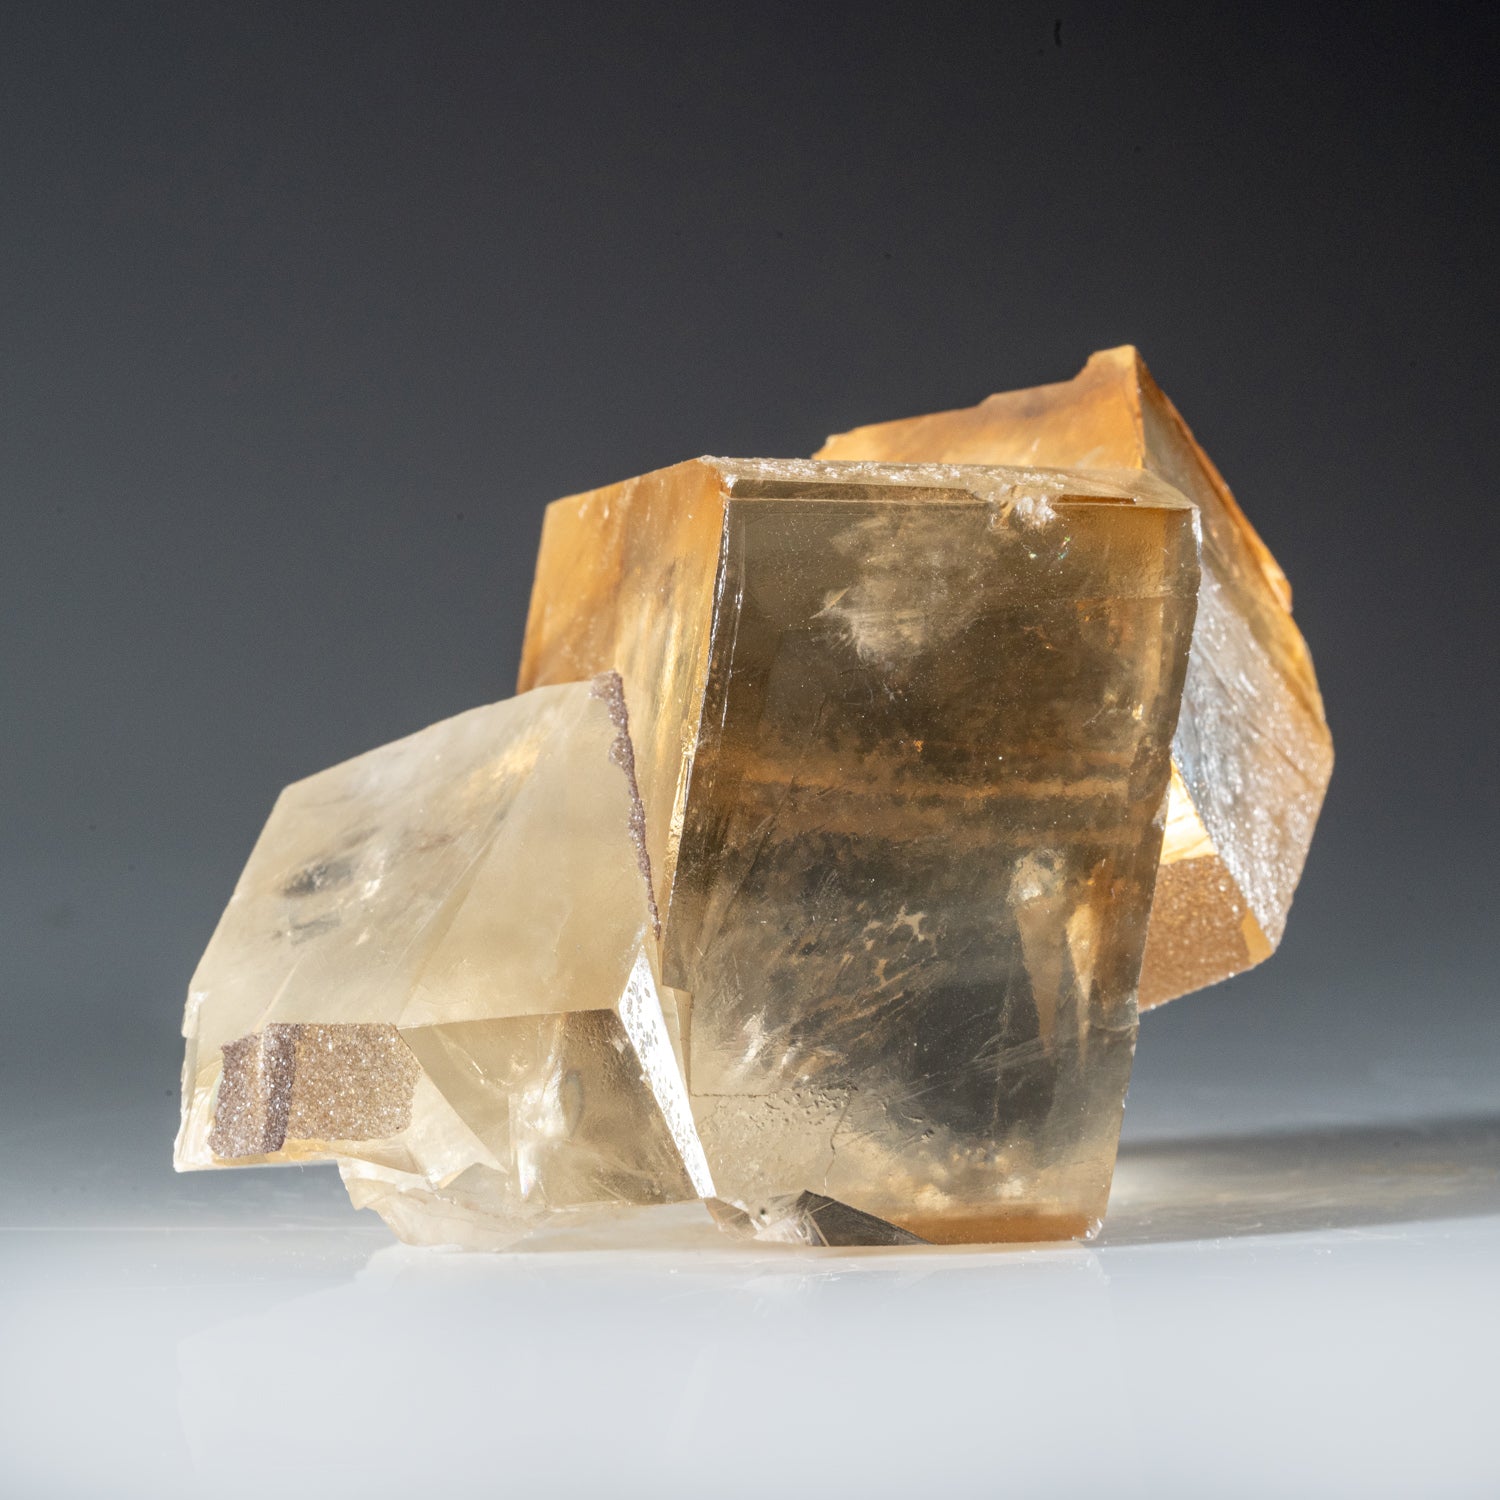 Twinned Golden Calcite from Nasik District, Maharashtra, India